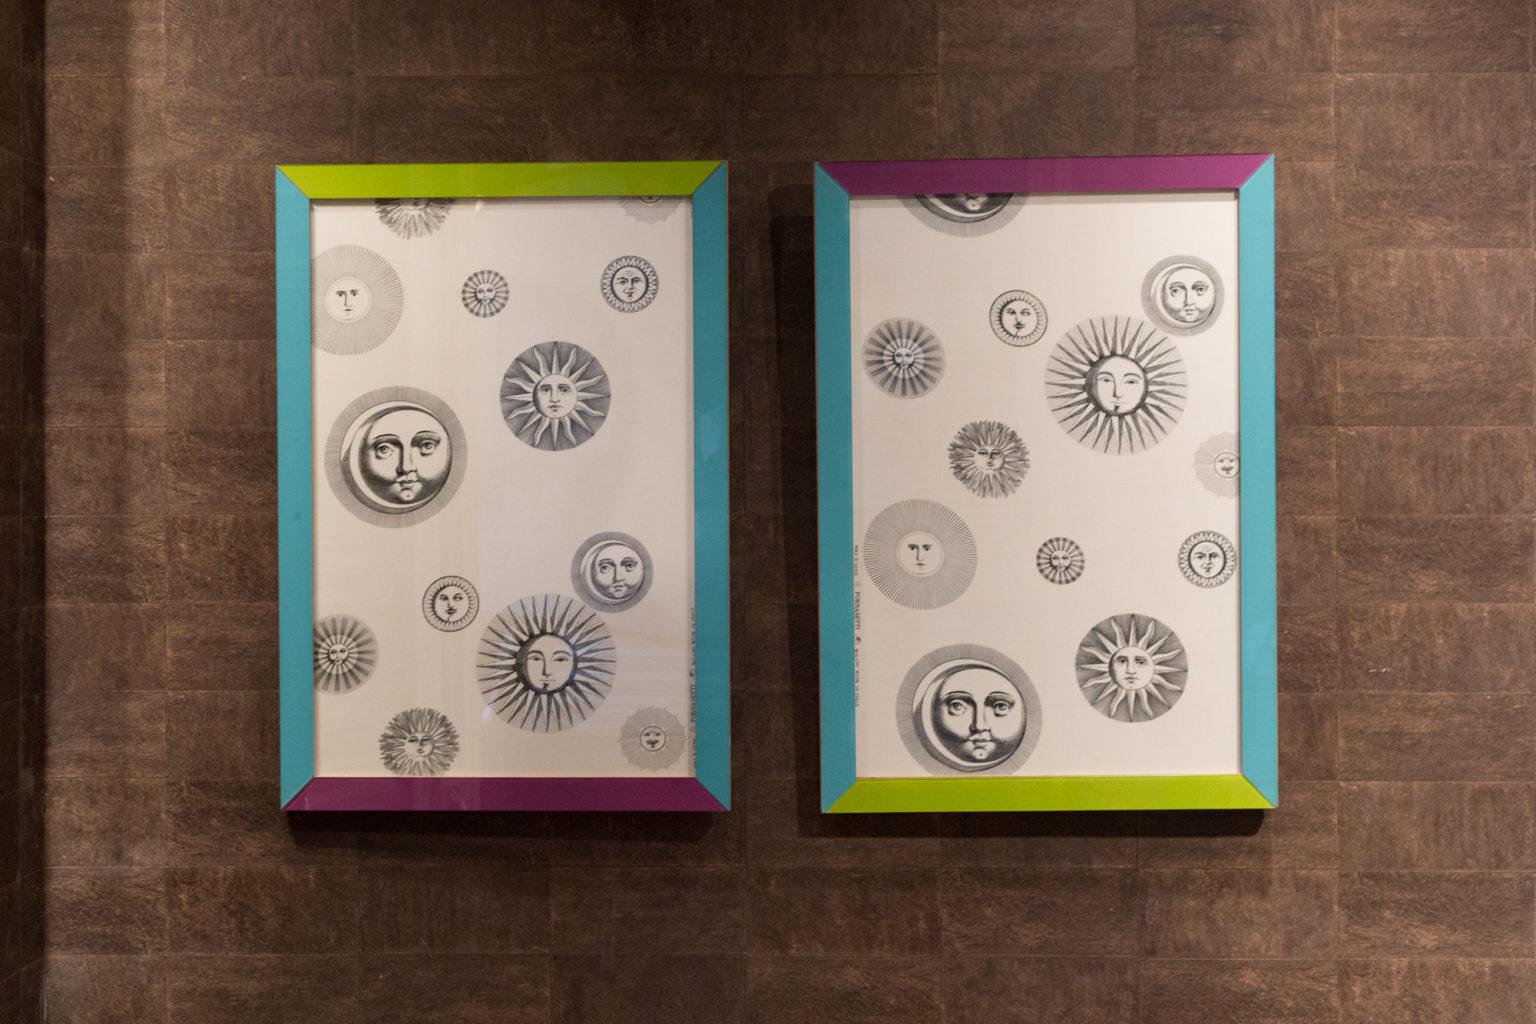 This pair of highly decorative panels features an original cotton sateen textile designed by Piero Fornasetti, with the motif of his “Soli e Lune” series.
The gorgeous original frames are colored glass on wood.
On both panels, the fabric,